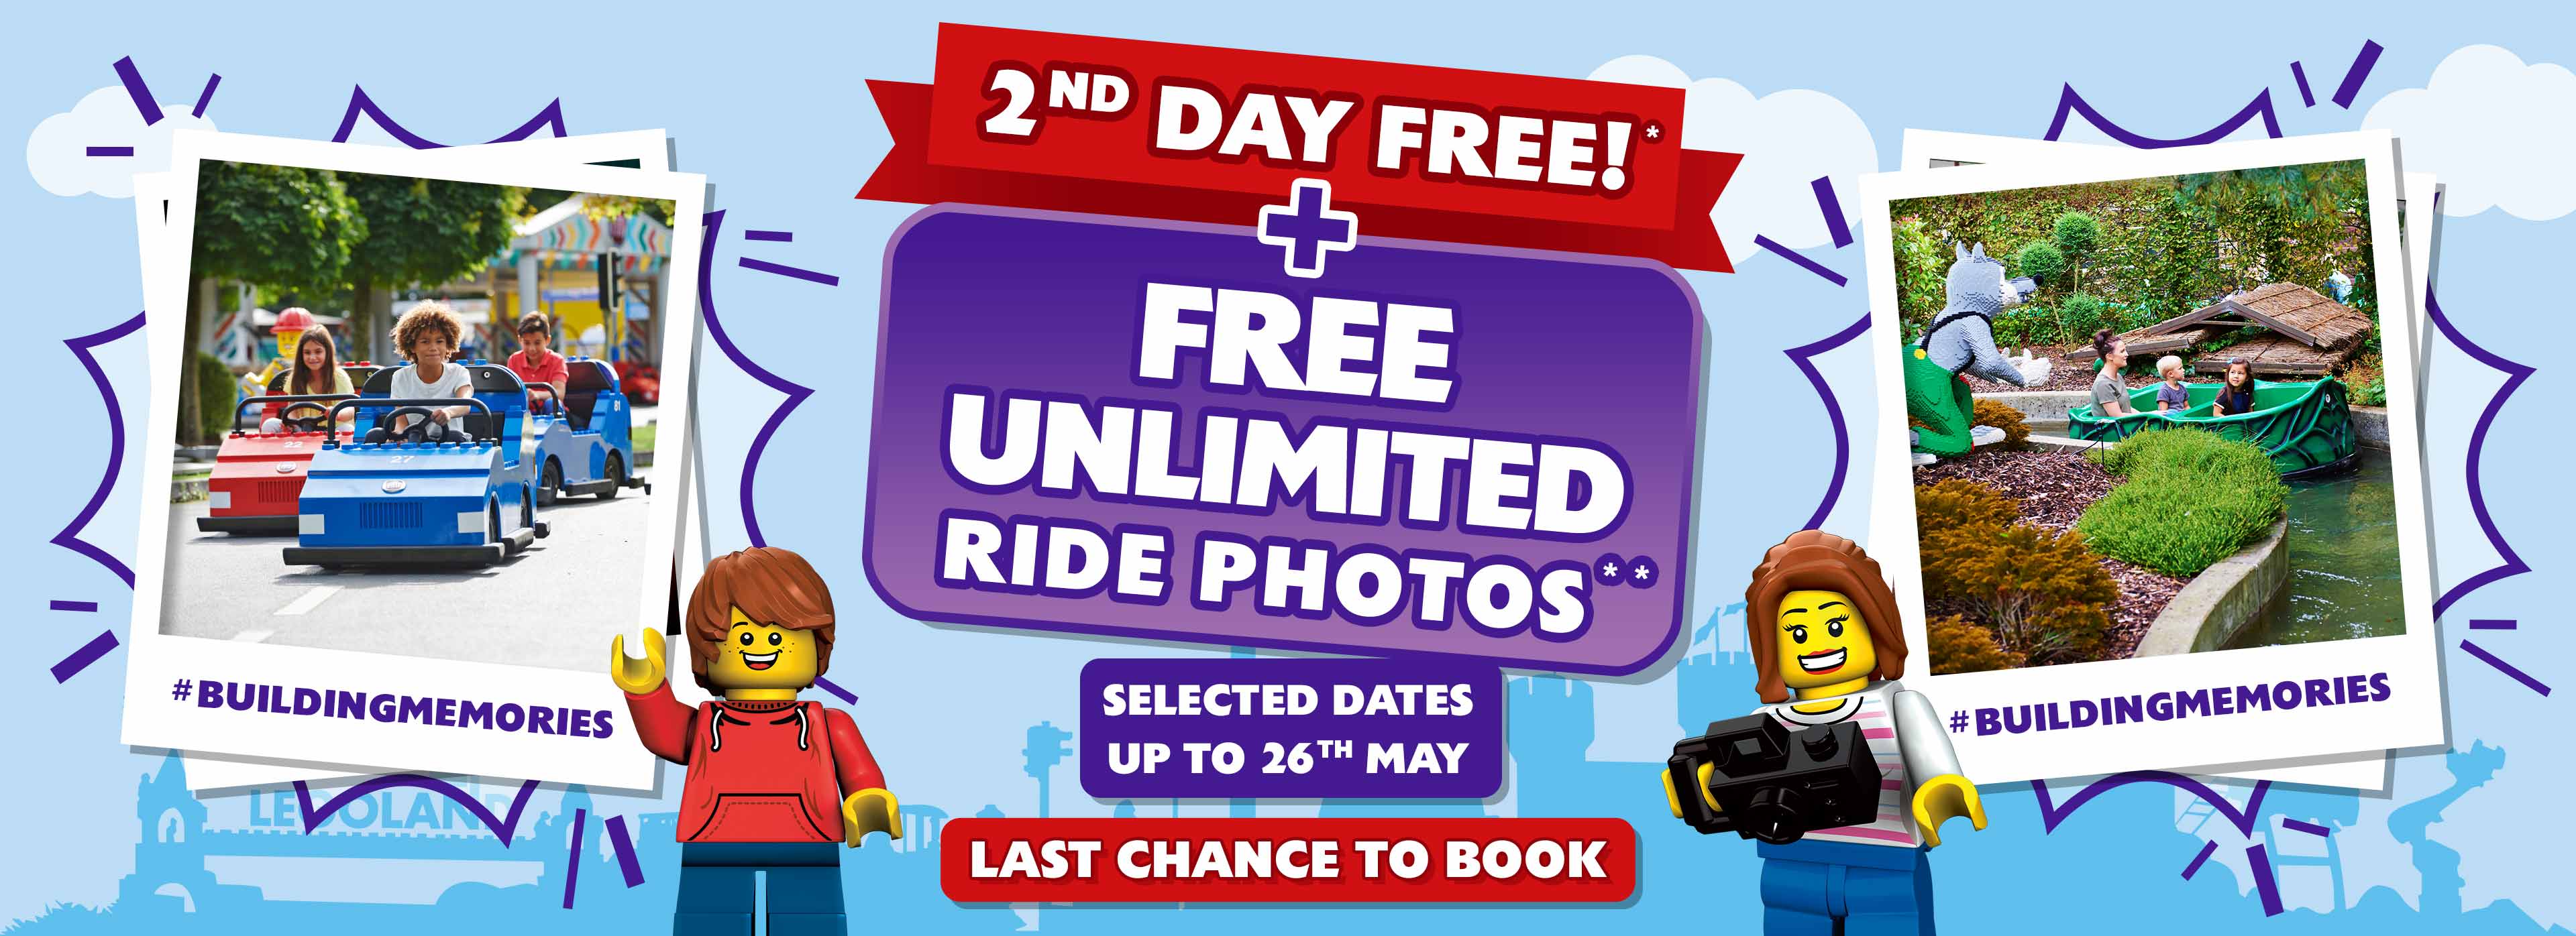 FREE Unlimited ride photos offer - with Legoland Holidays!